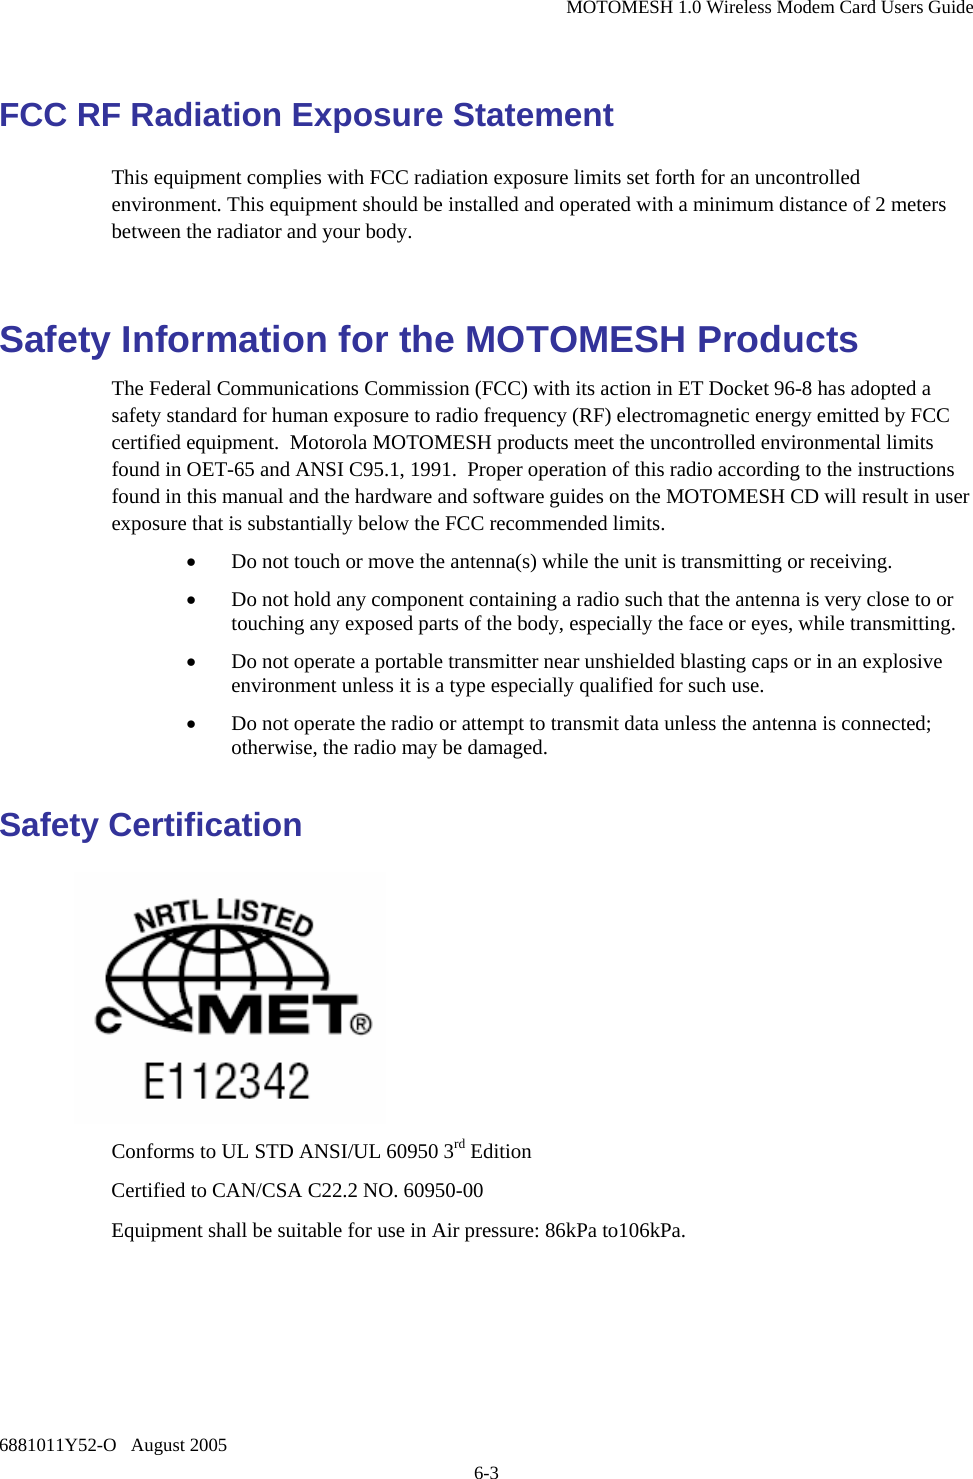 MOTOMESH 1.0 Wireless Modem Card Users Guide 6881011Y52-O   August 2005 6-3 FCC RF Radiation Exposure Statement This equipment complies with FCC radiation exposure limits set forth for an uncontrolled environment. This equipment should be installed and operated with a minimum distance of 2 meters between the radiator and your body.  Safety Information for the MOTOMESH Products The Federal Communications Commission (FCC) with its action in ET Docket 96-8 has adopted a safety standard for human exposure to radio frequency (RF) electromagnetic energy emitted by FCC certified equipment.  Motorola MOTOMESH products meet the uncontrolled environmental limits found in OET-65 and ANSI C95.1, 1991.  Proper operation of this radio according to the instructions found in this manual and the hardware and software guides on the MOTOMESH CD will result in user exposure that is substantially below the FCC recommended limits.  • Do not touch or move the antenna(s) while the unit is transmitting or receiving. • Do not hold any component containing a radio such that the antenna is very close to or touching any exposed parts of the body, especially the face or eyes, while transmitting. • Do not operate a portable transmitter near unshielded blasting caps or in an explosive environment unless it is a type especially qualified for such use. • Do not operate the radio or attempt to transmit data unless the antenna is connected; otherwise, the radio may be damaged. Safety Certification   Conforms to UL STD ANSI/UL 60950 3rd Edition  Certified to CAN/CSA C22.2 NO. 60950-00 Equipment shall be suitable for use in Air pressure: 86kPa to106kPa.  